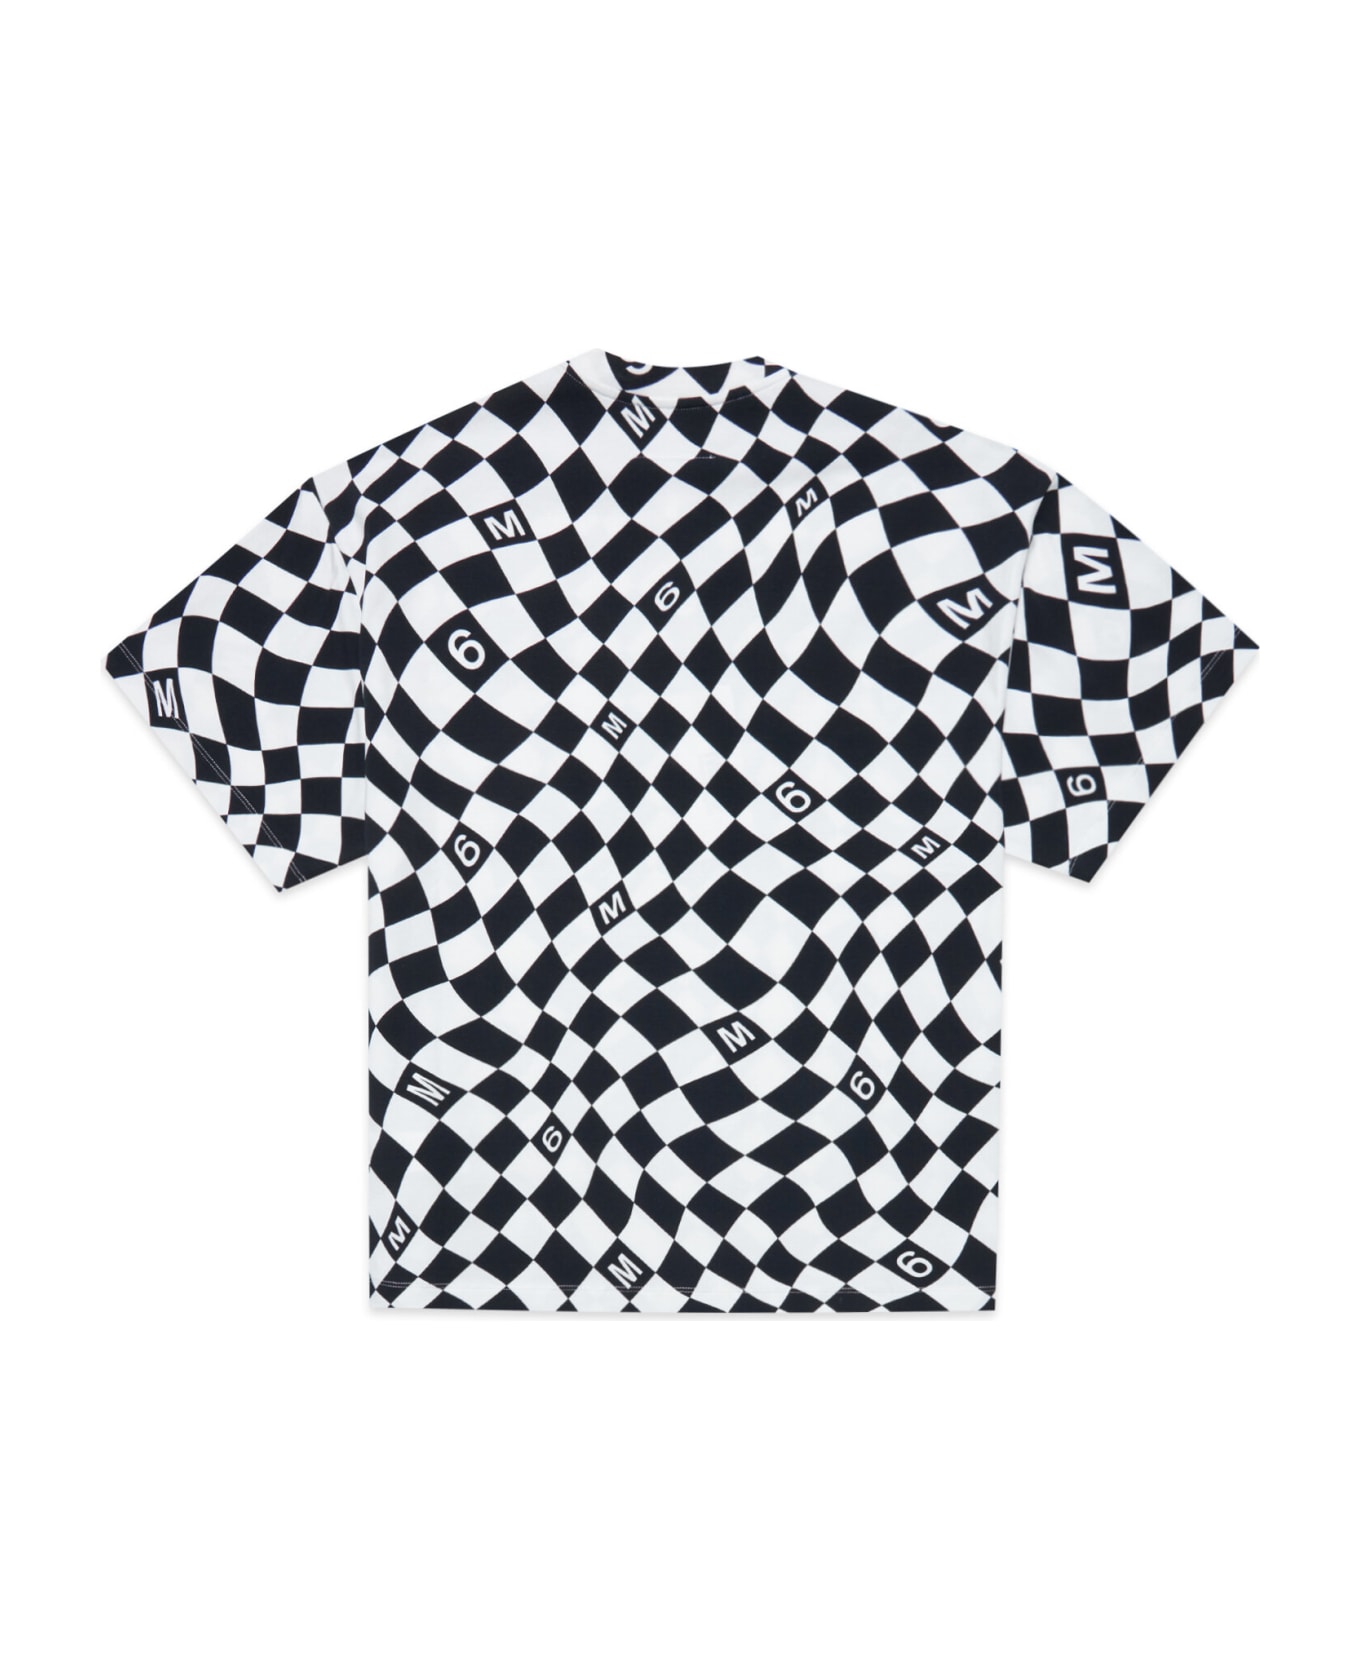 MM6 Maison Margiela Mm6mcu1u Sw Cover-ups Maison Margiela Maxi T-shirt Cover-up With Black And White Chequered Pattern - White/black